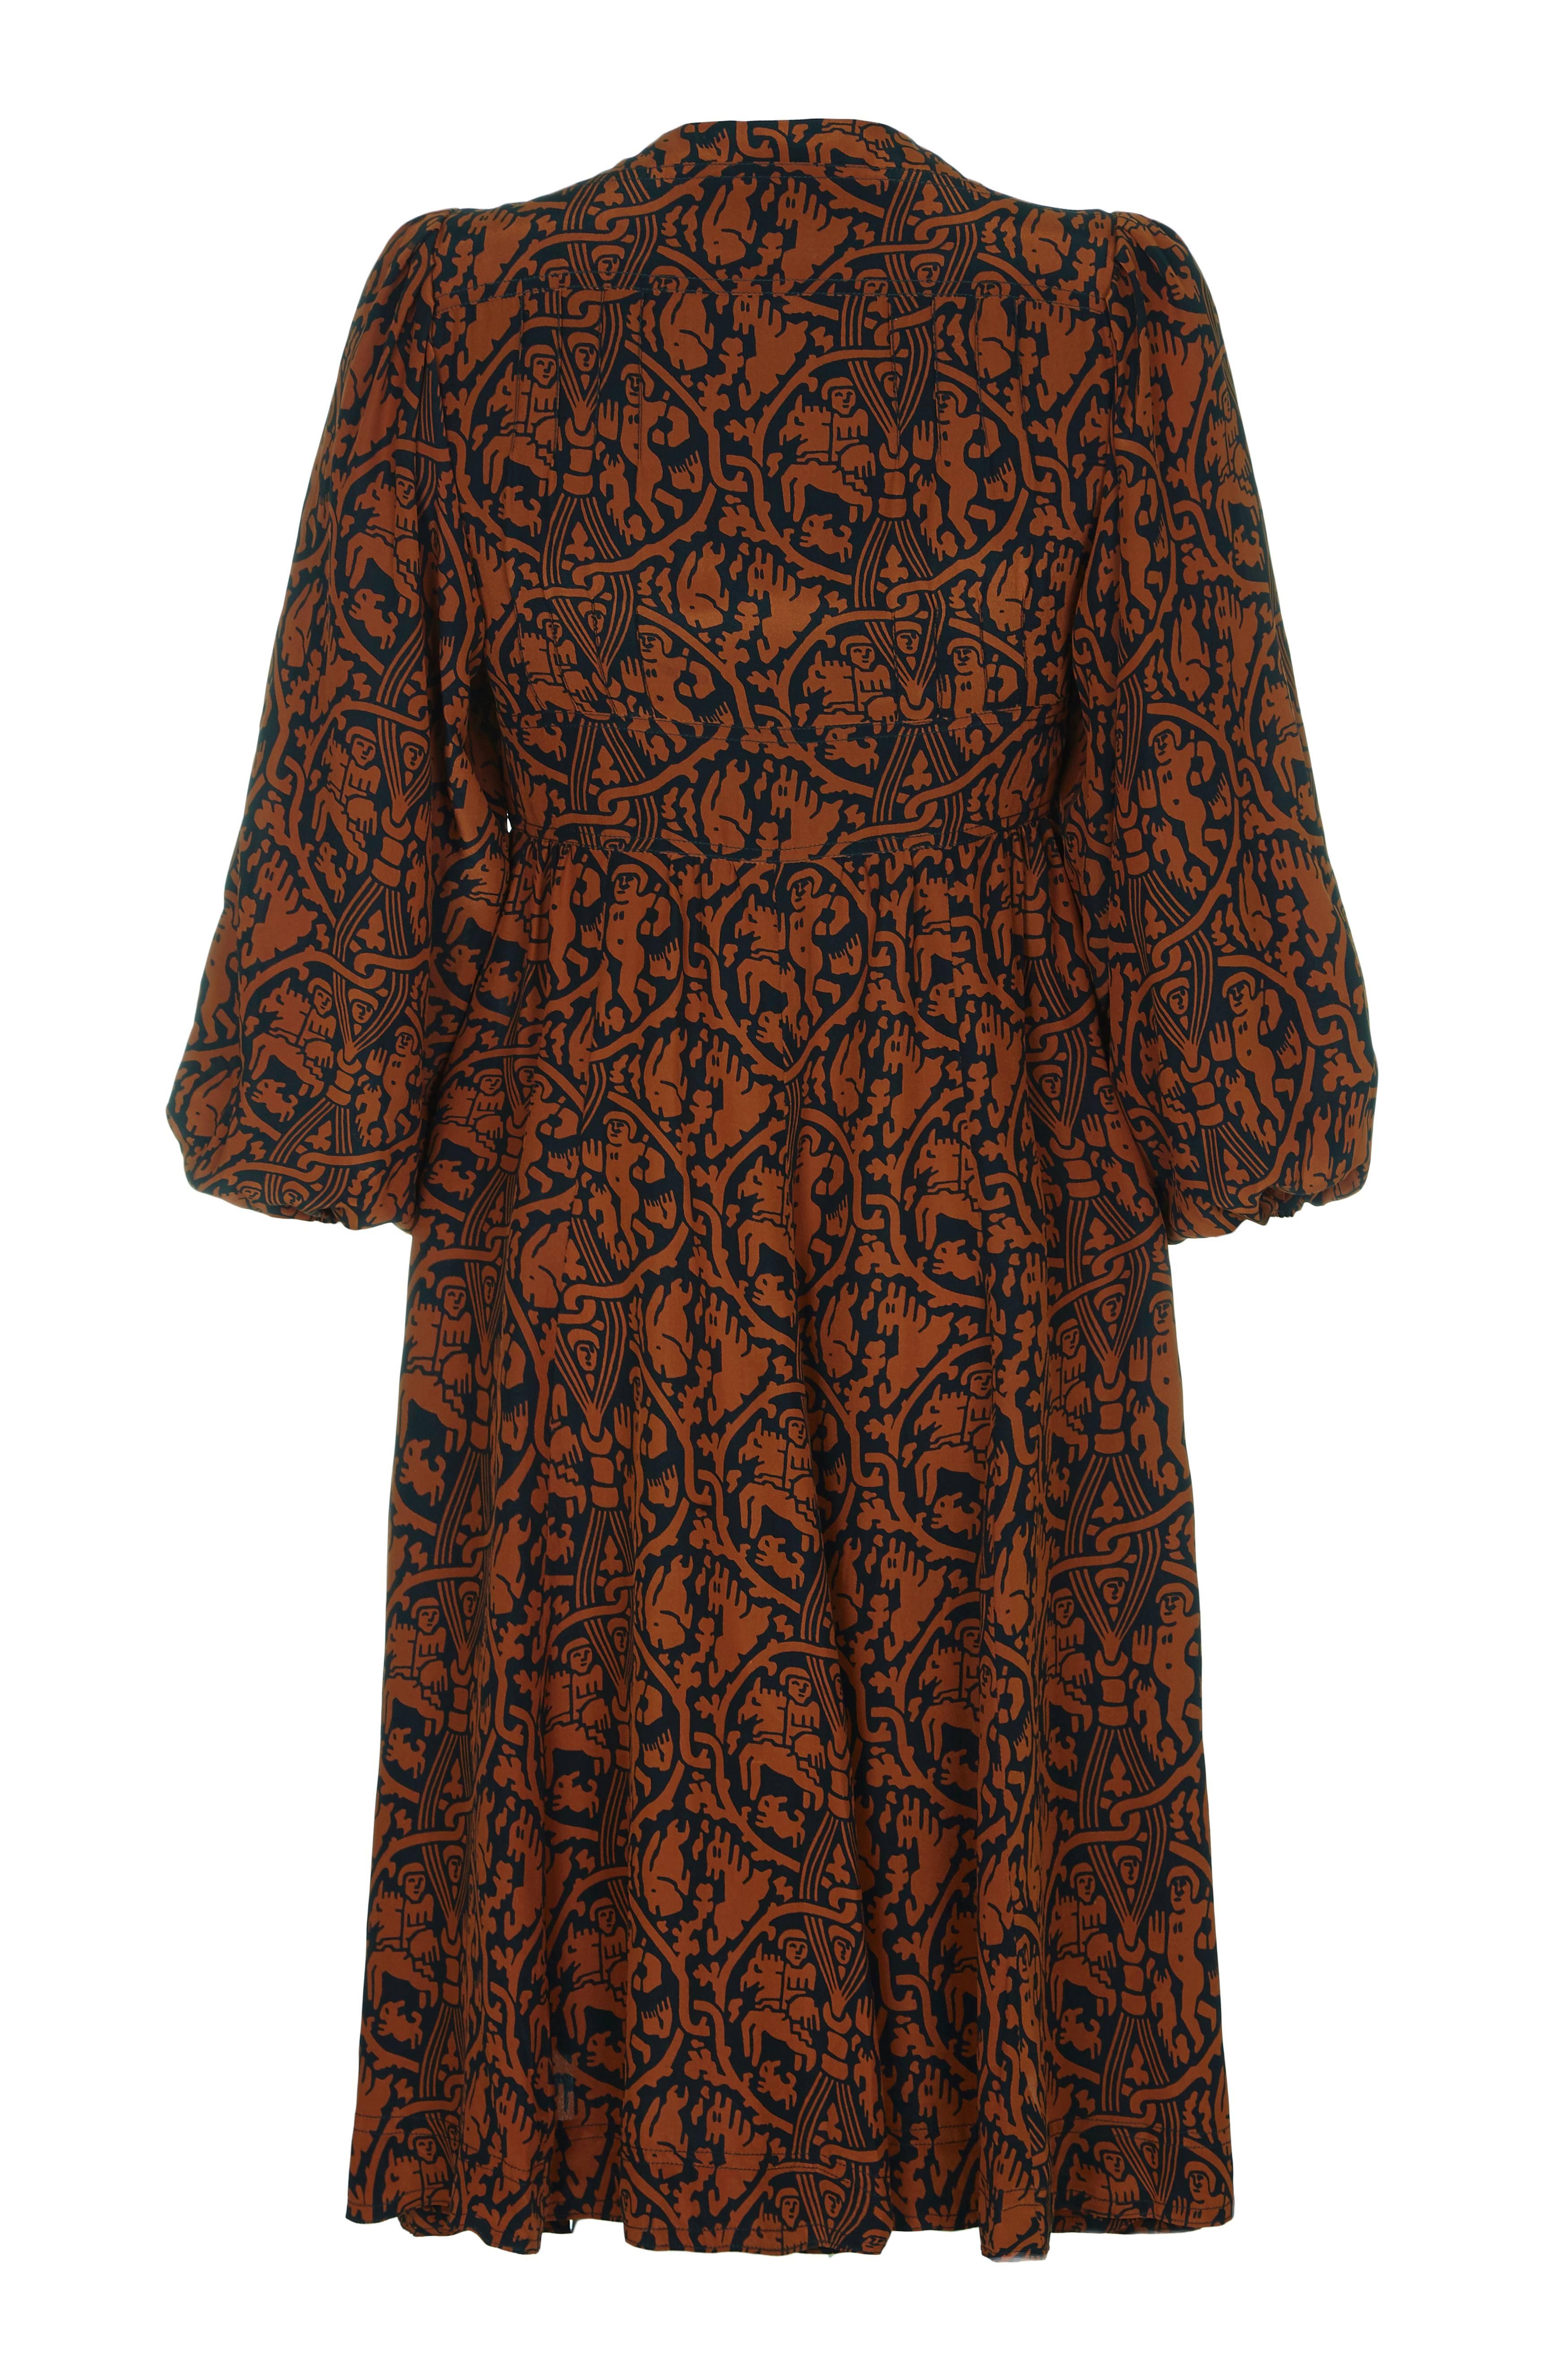 Fantastic vintage 1970s Jean Muir silk dress with novelty ancient civilisation print in terracotta on a black background.  The dress features 3/4 balloon sleeves, A-line skirt and a band under the bust.  It fastens at the front with buttons and is